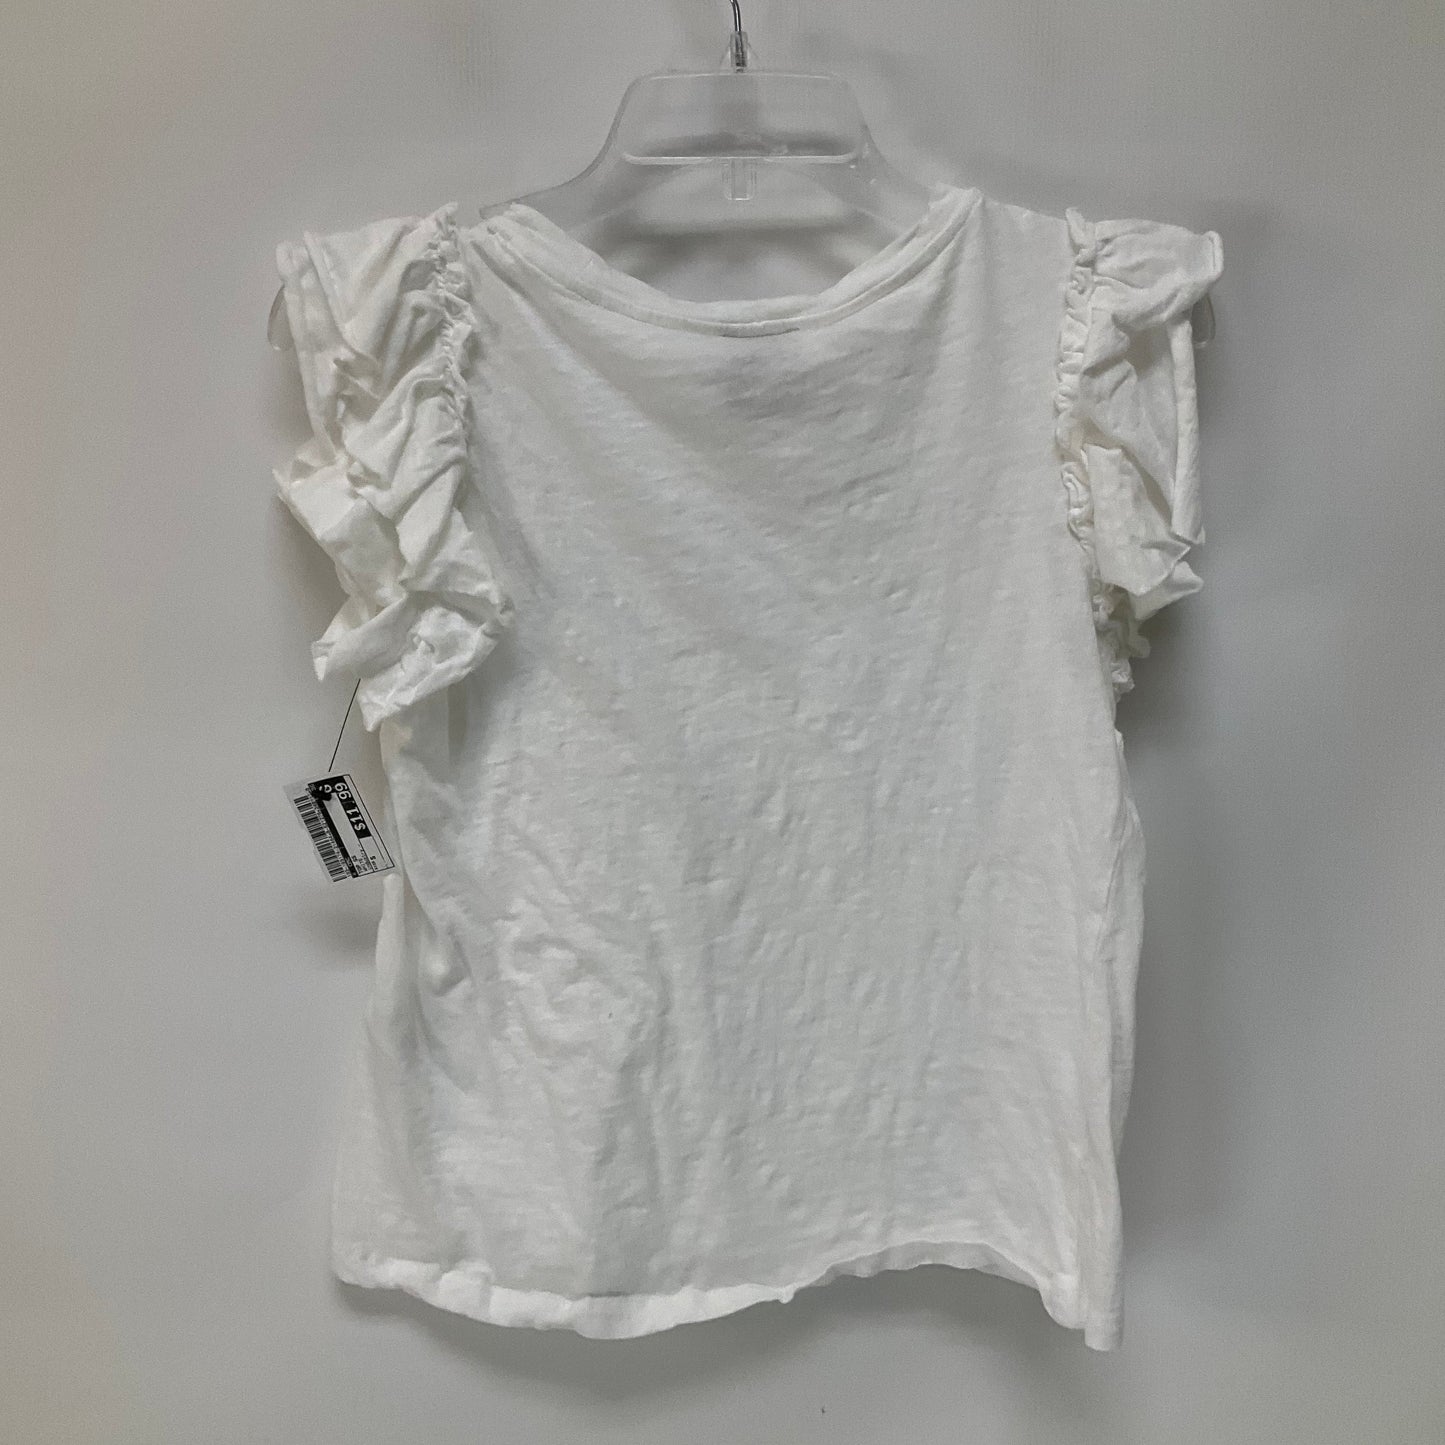 White Top Short Sleeve Cmc, Size S